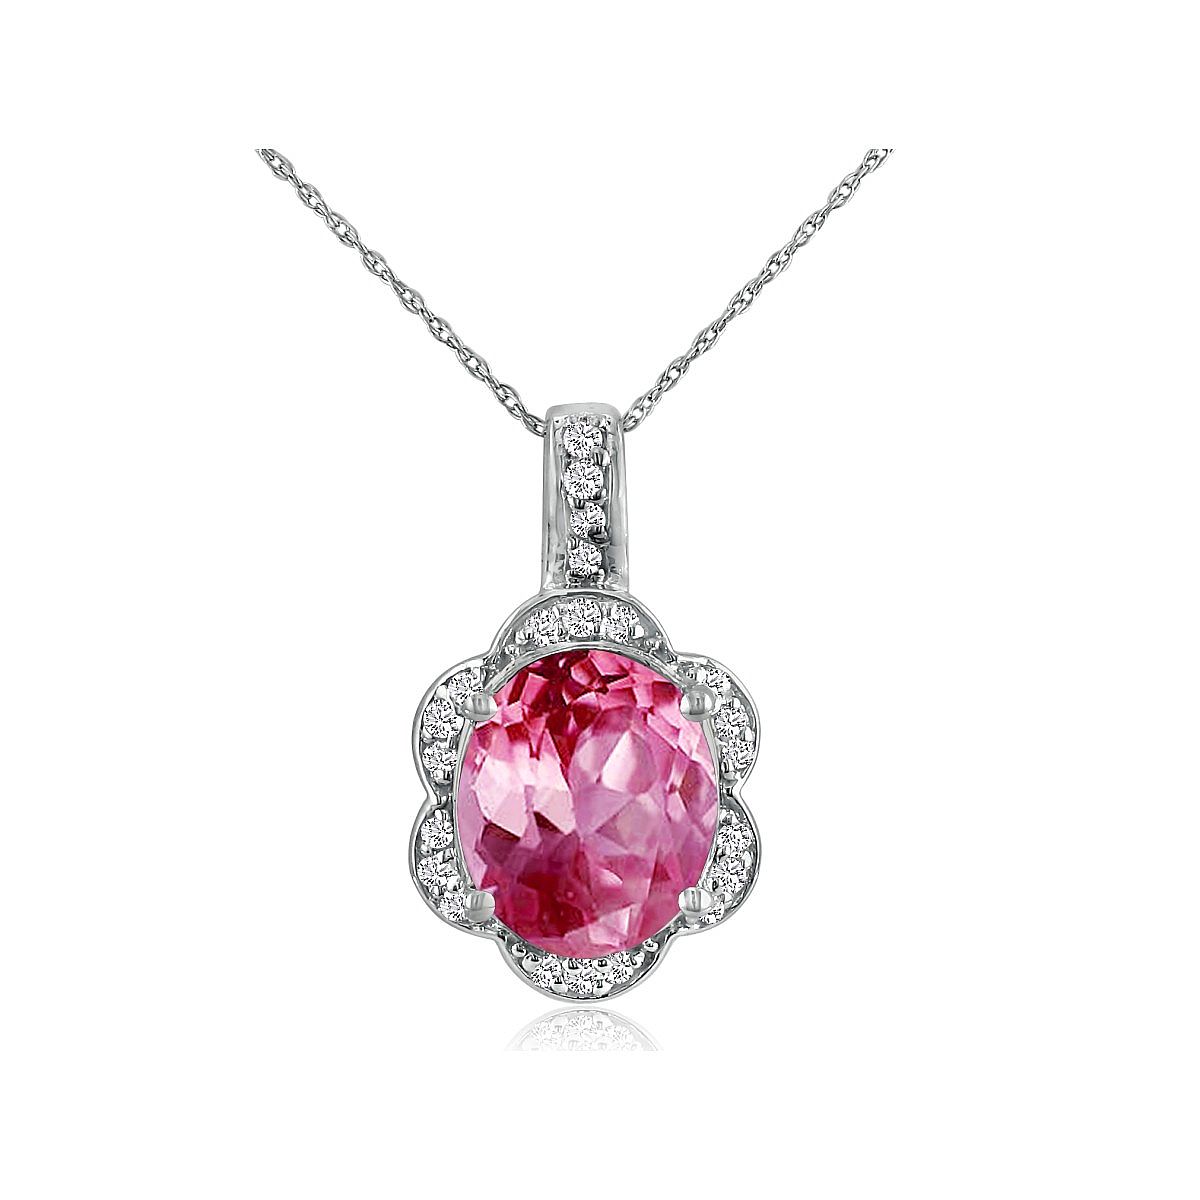 Macy's 14K White Gold Pink Topaz (2 Ct. t.w.) and Diamond Accent Pendant Necklace